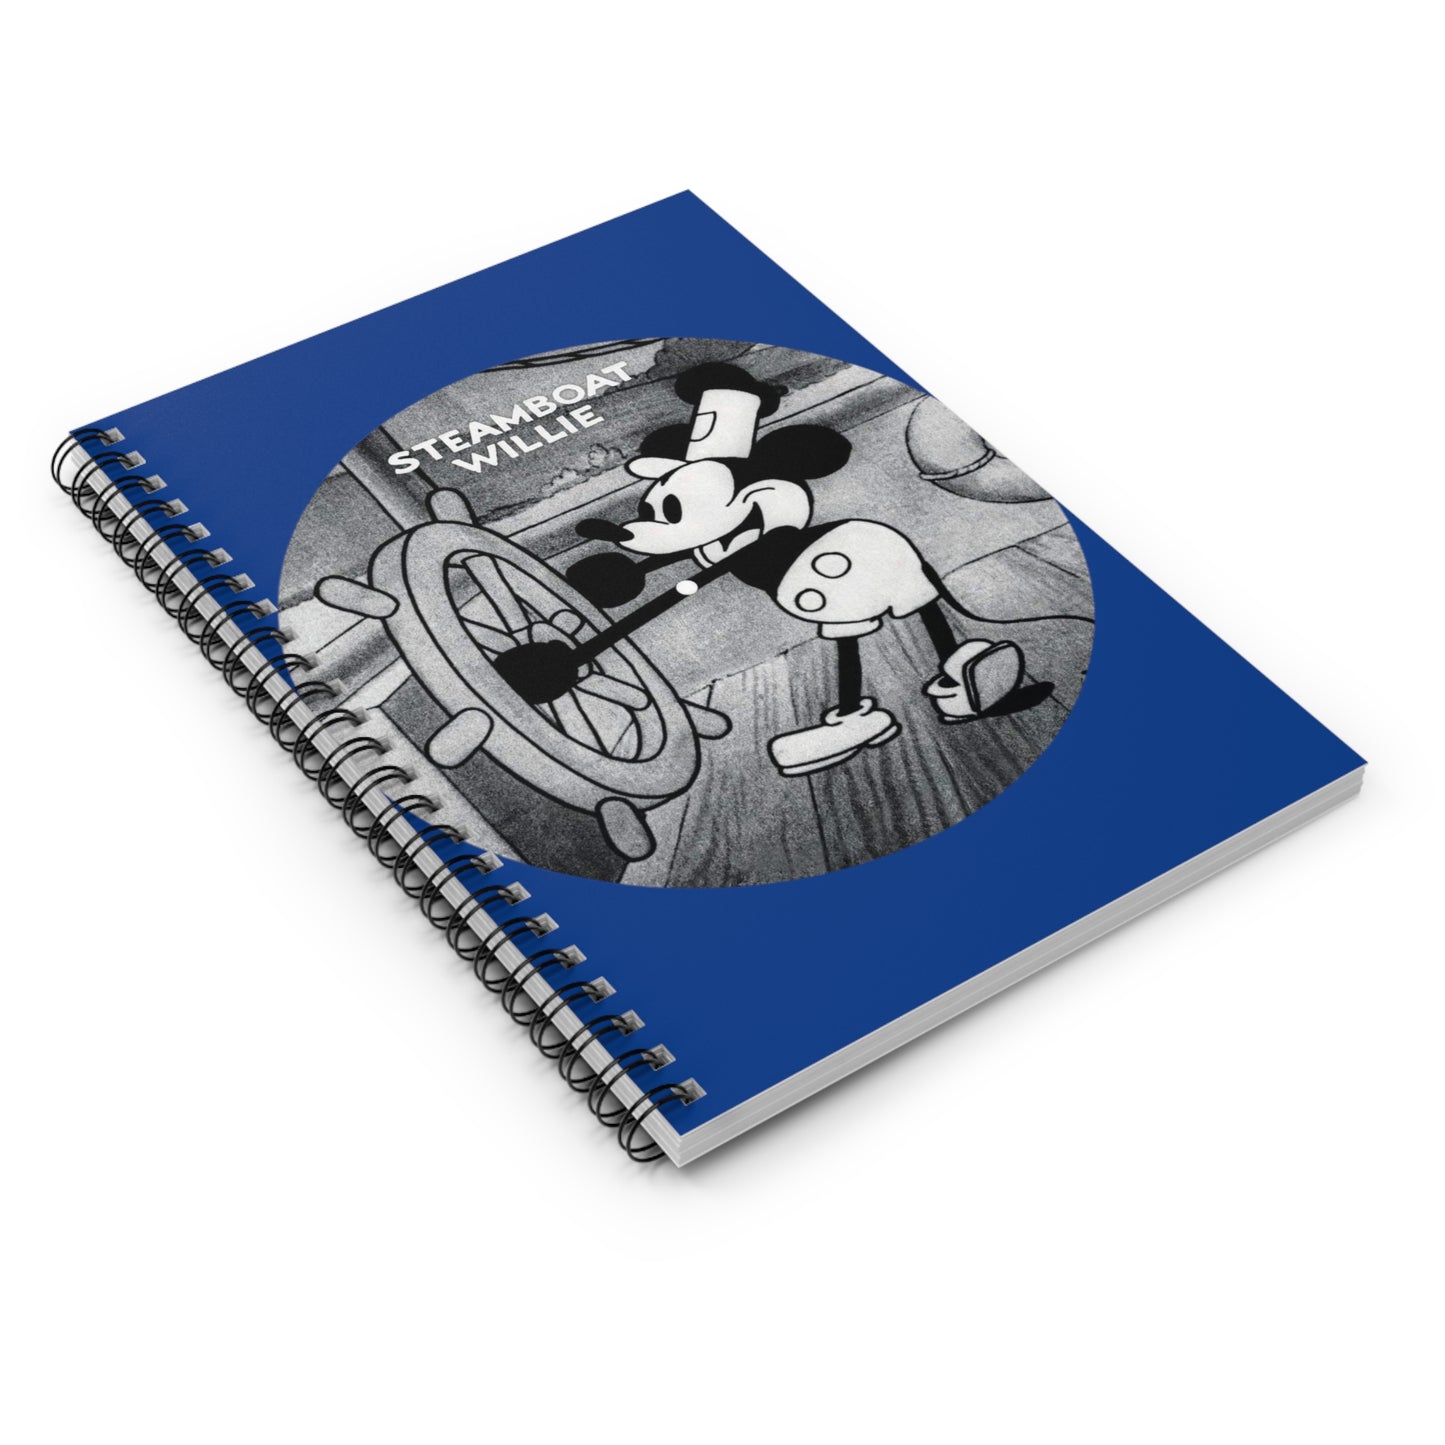 "Steamboat Willie" Blue Spiral Notebook - Ruled Line, 118 Ruled Line Pages, Perfect for Journaling, School, Office, Notes, Etc.